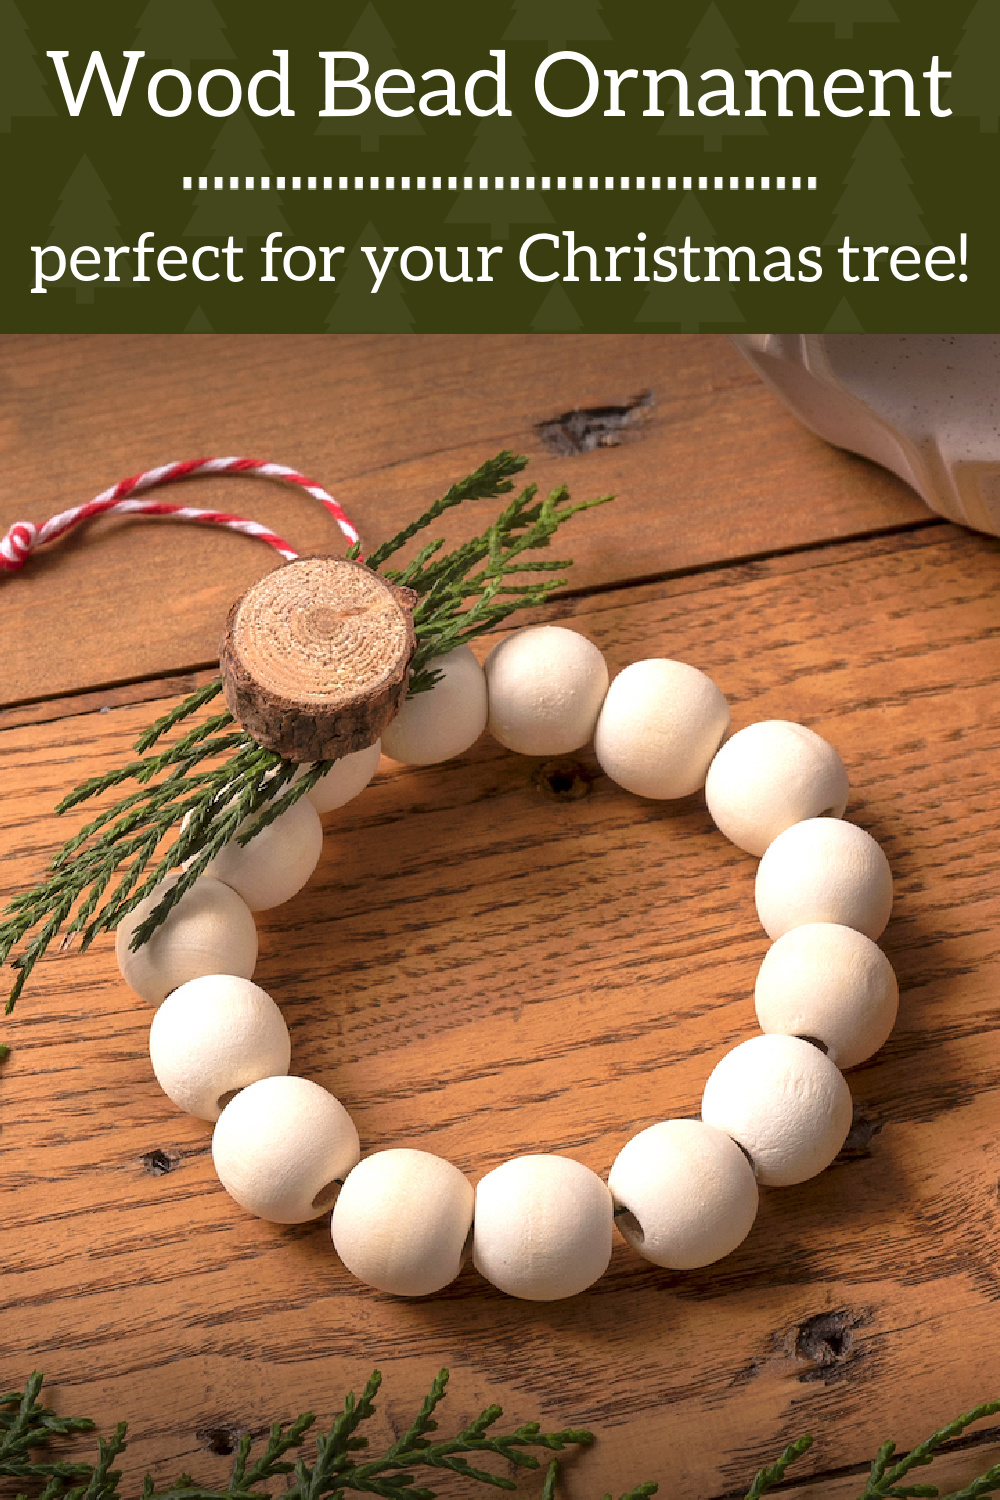 DIY Ornament  Wooden Bead Christmas Tree - A Wonderful Thought